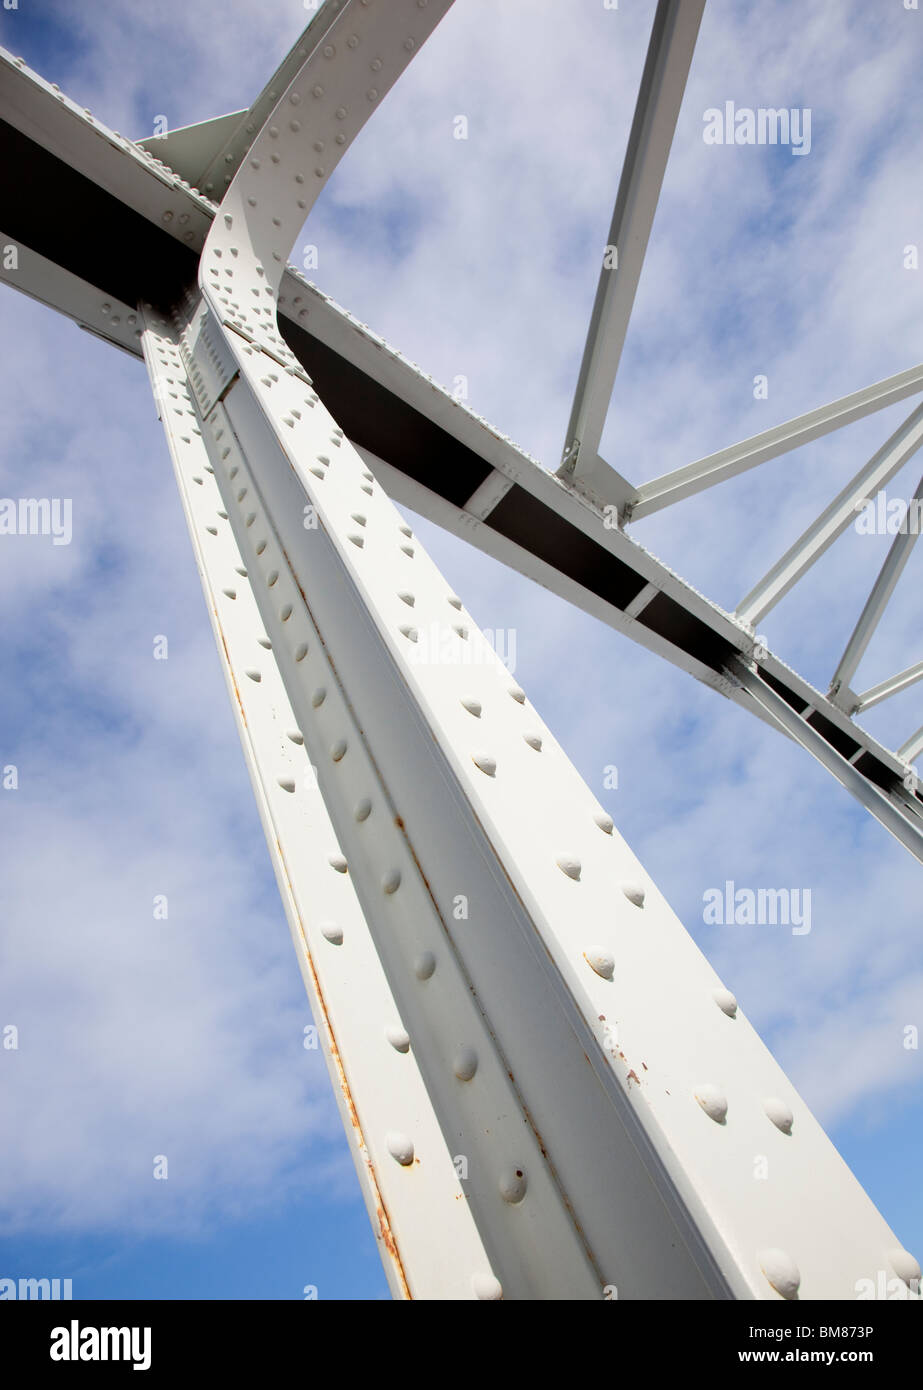 Riveted steel beam at a steel bridge support structure Stock Photo